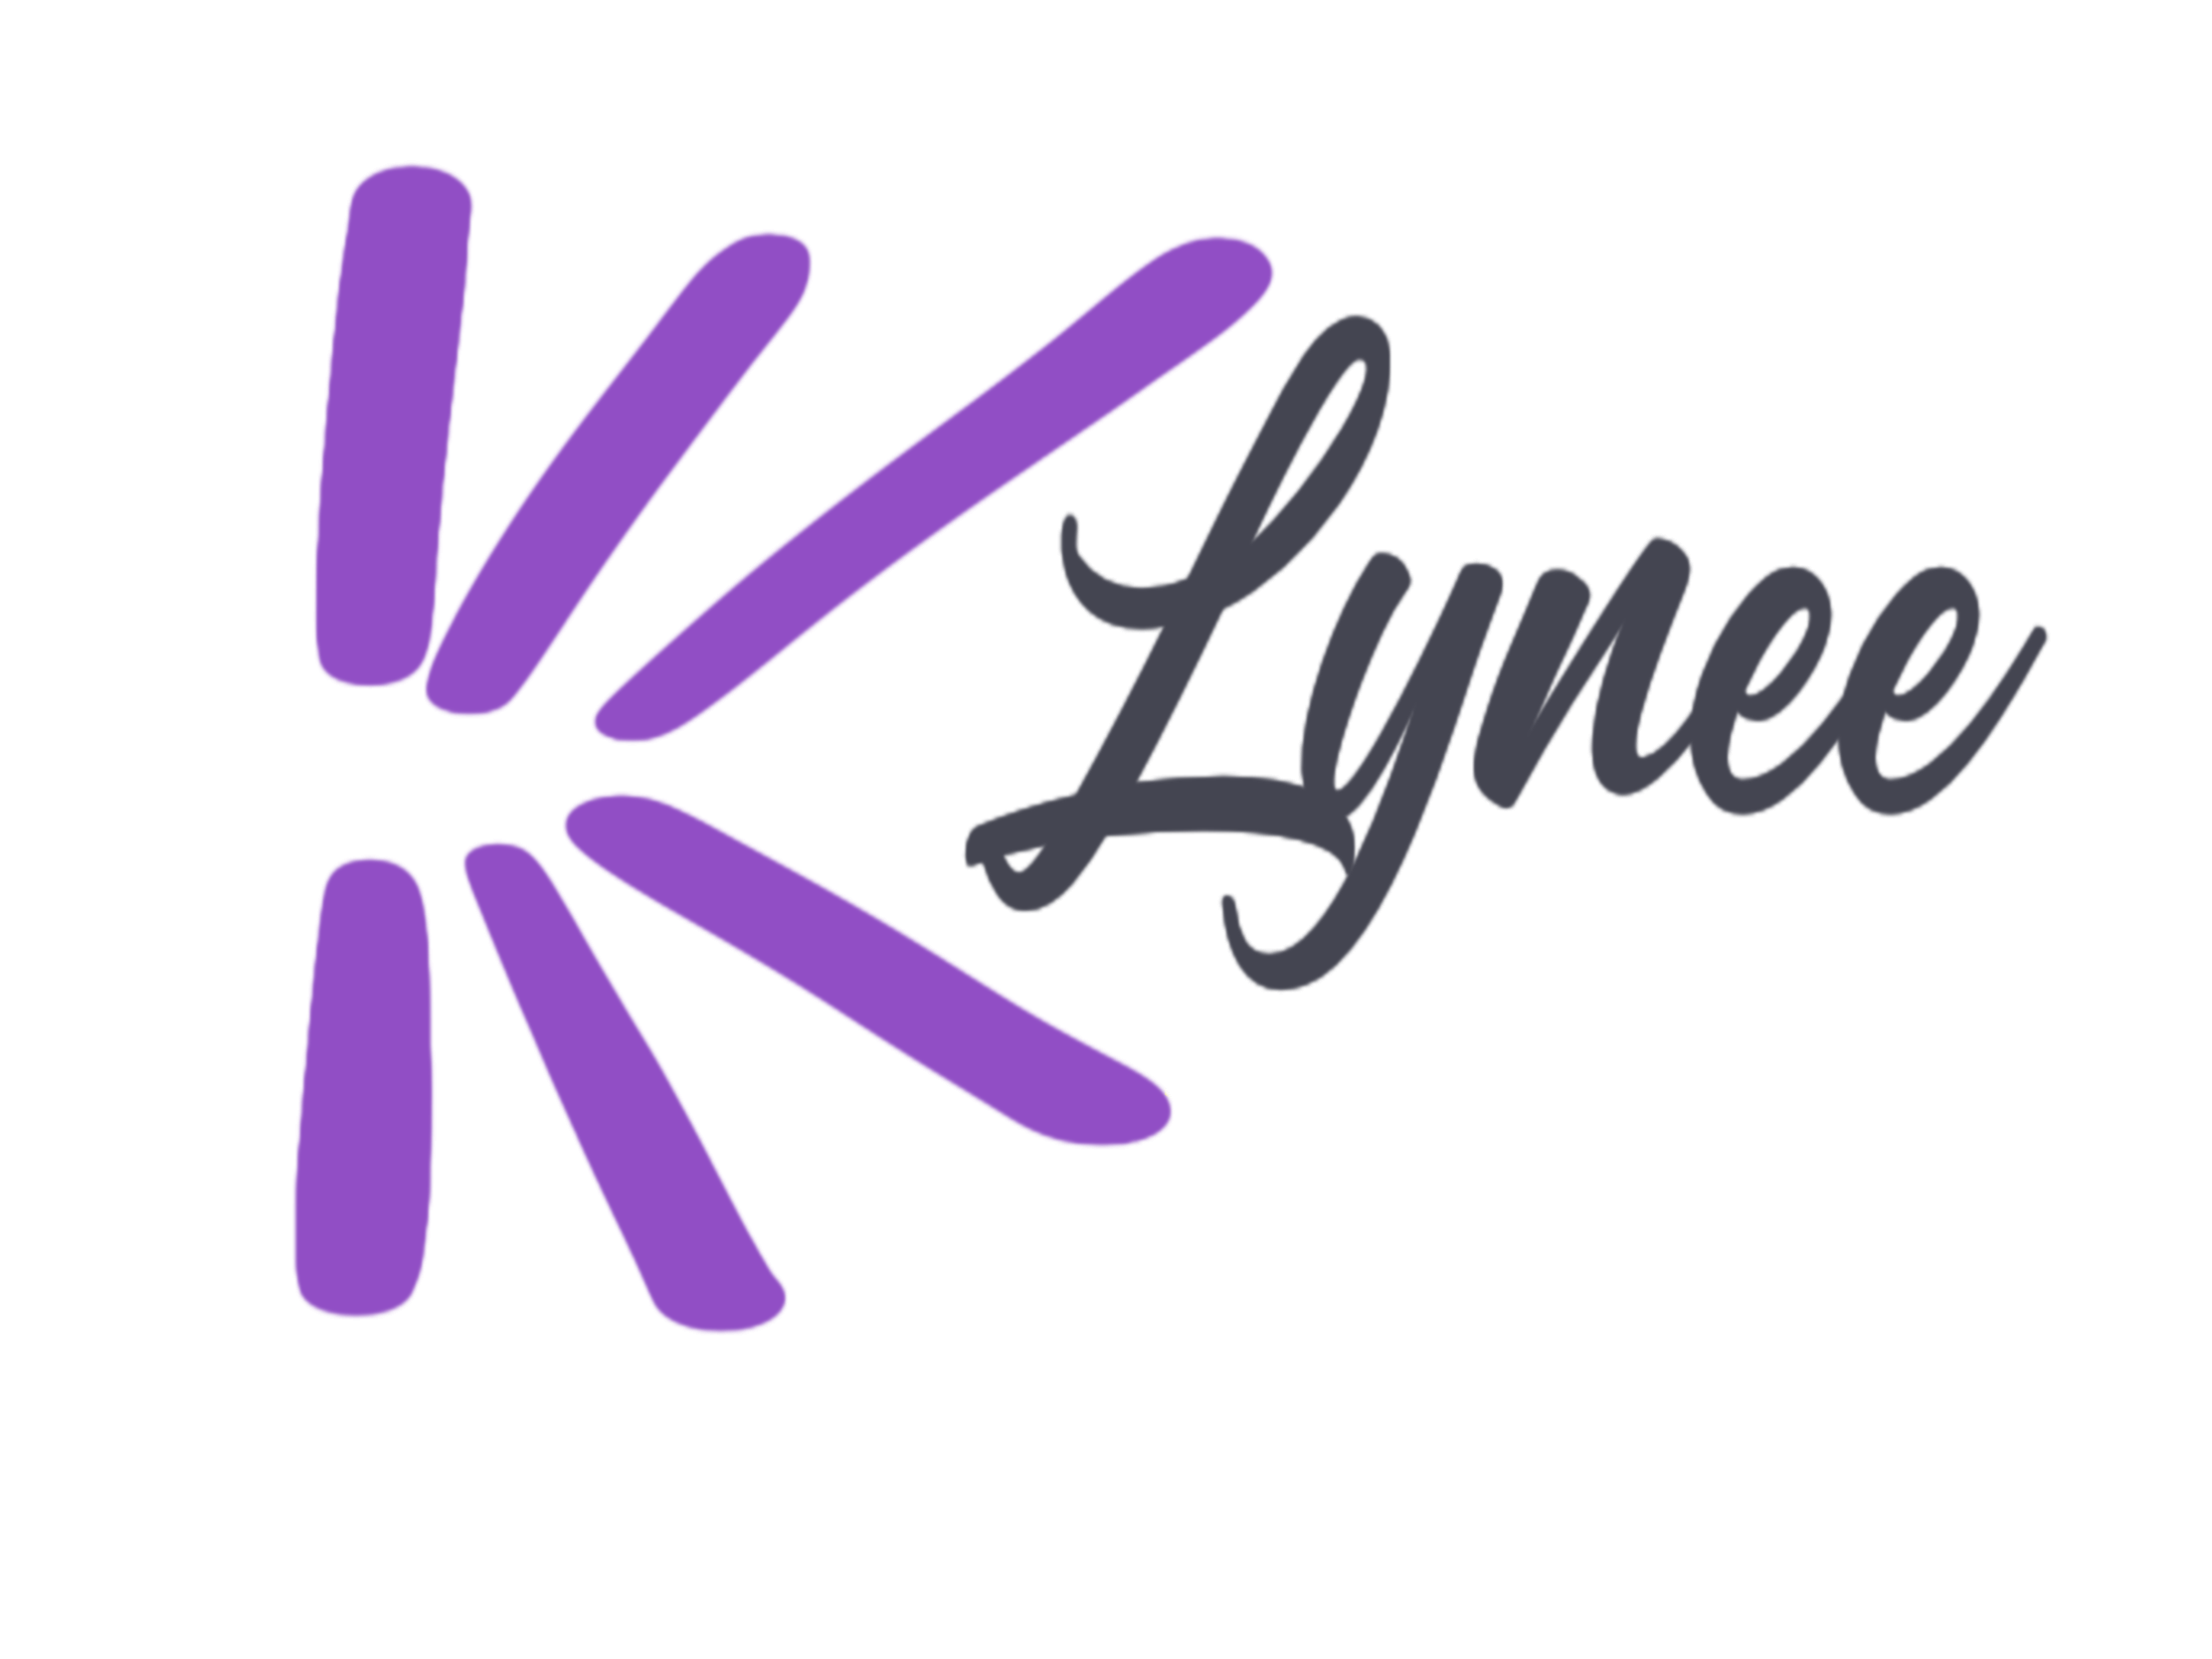 Logo with Lynee